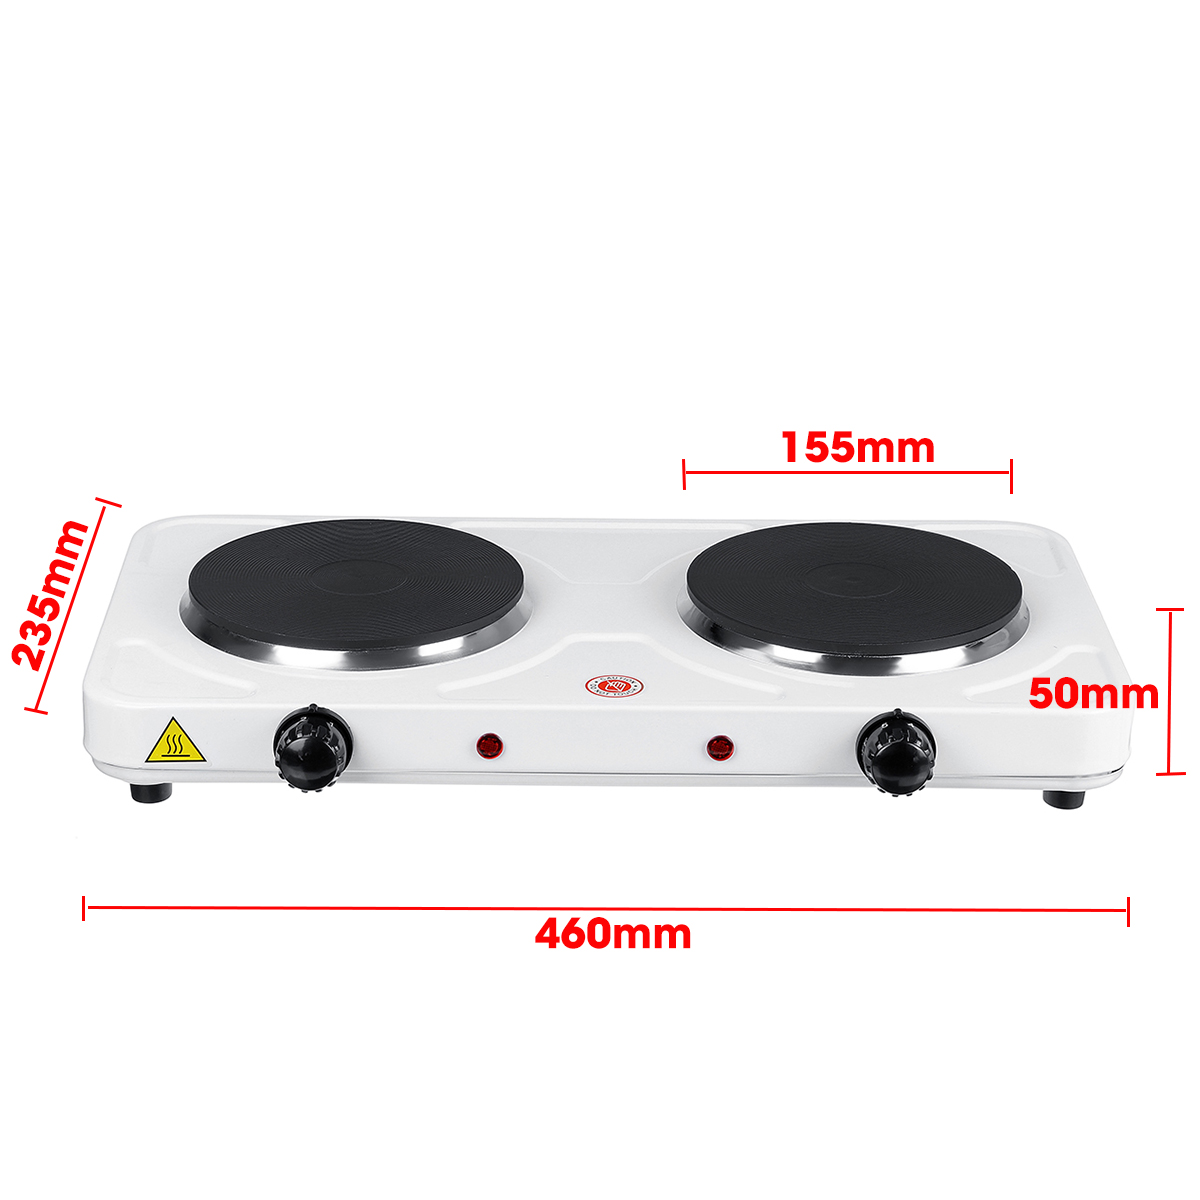 110V-2000W-Portable-Double-Electric-Stove-Burner-Hot-Plate-Cooking-Heater-1730241-4